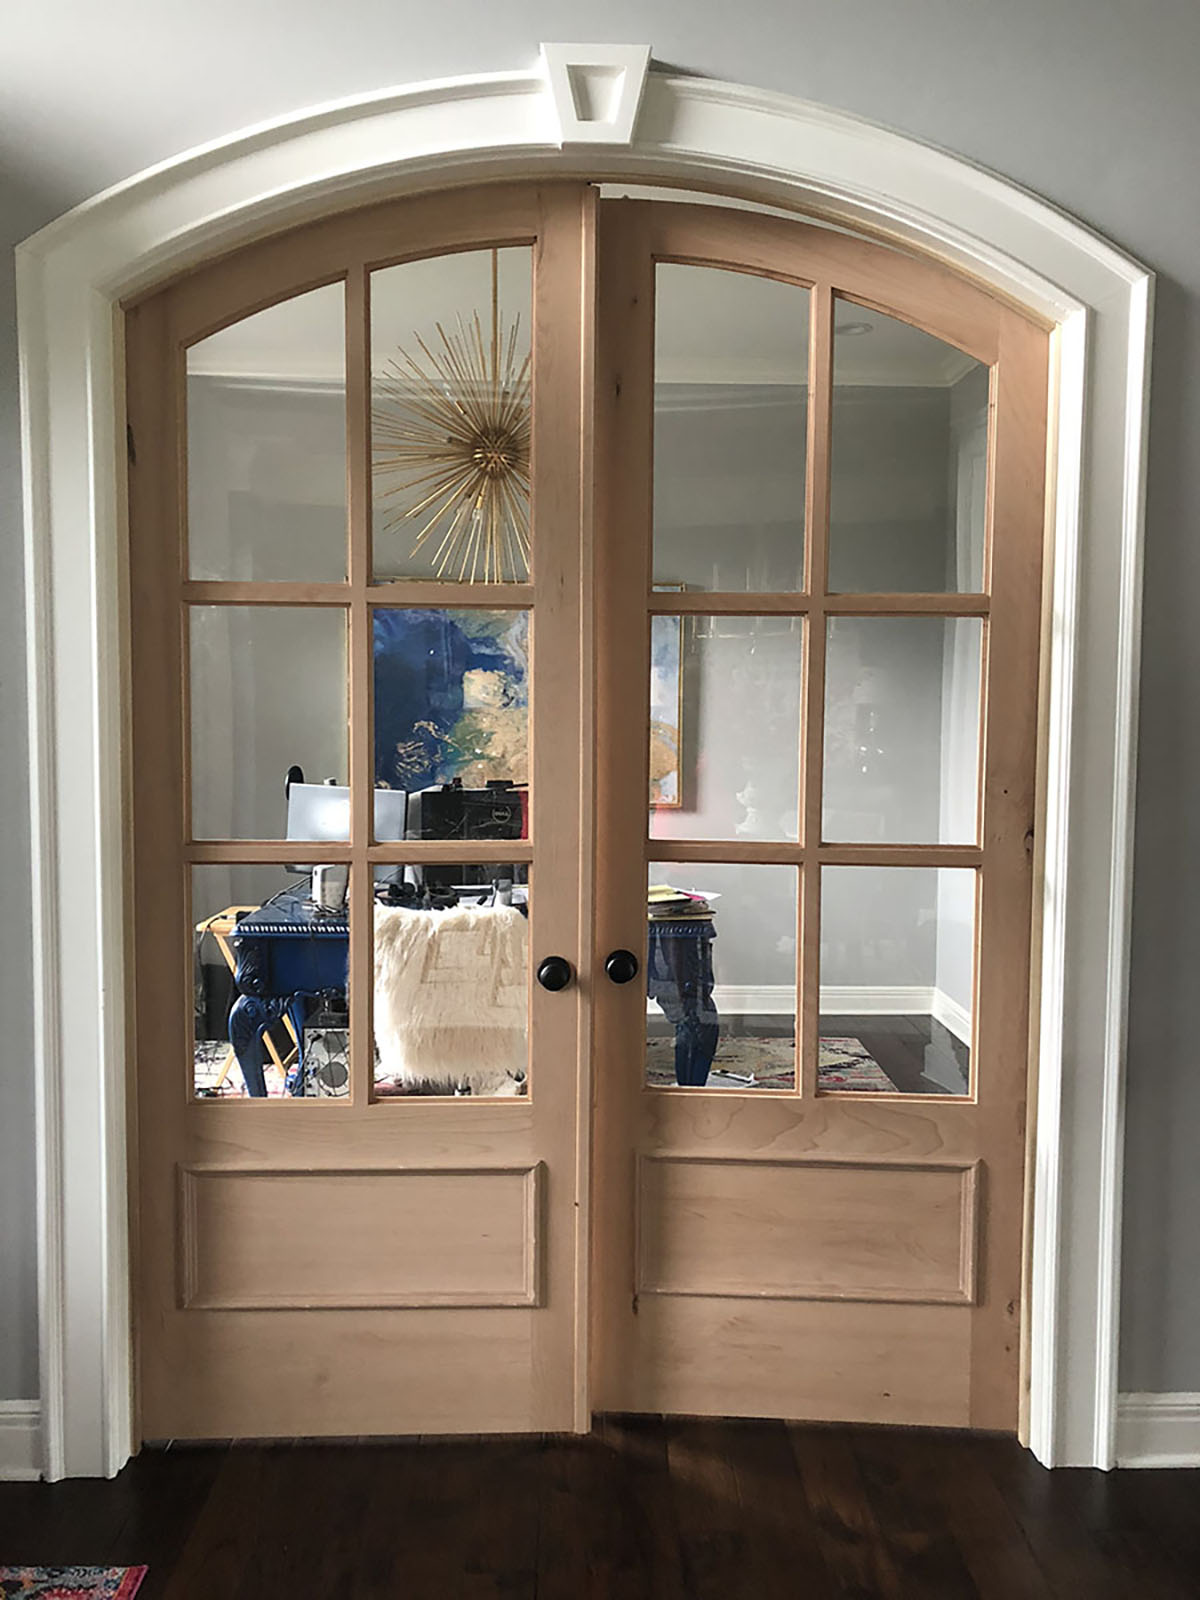 New Interior Doors For Home - Photos